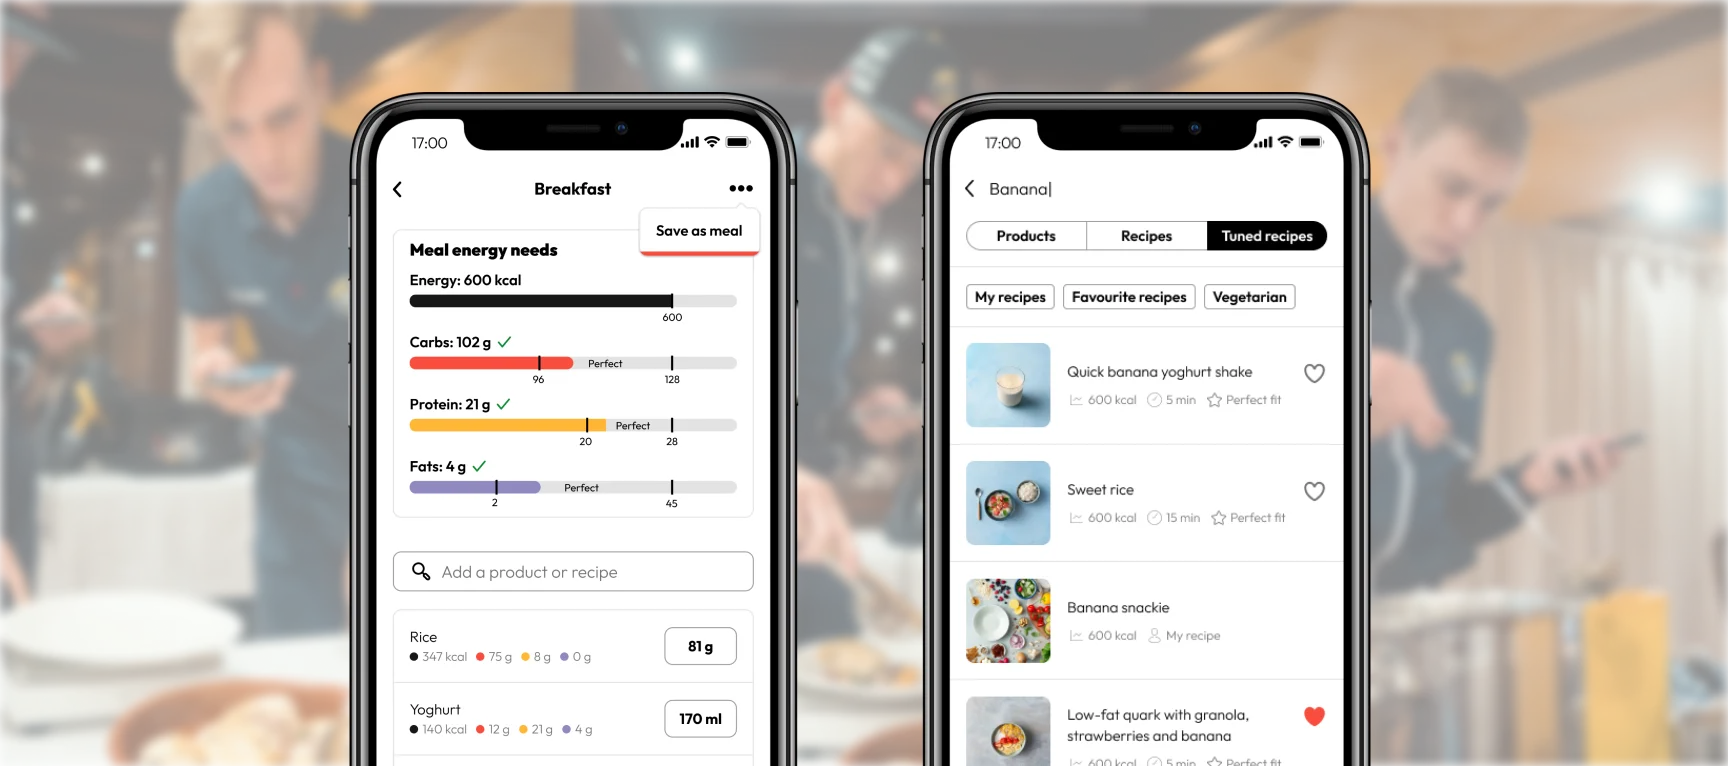 Example of FoodCoach app